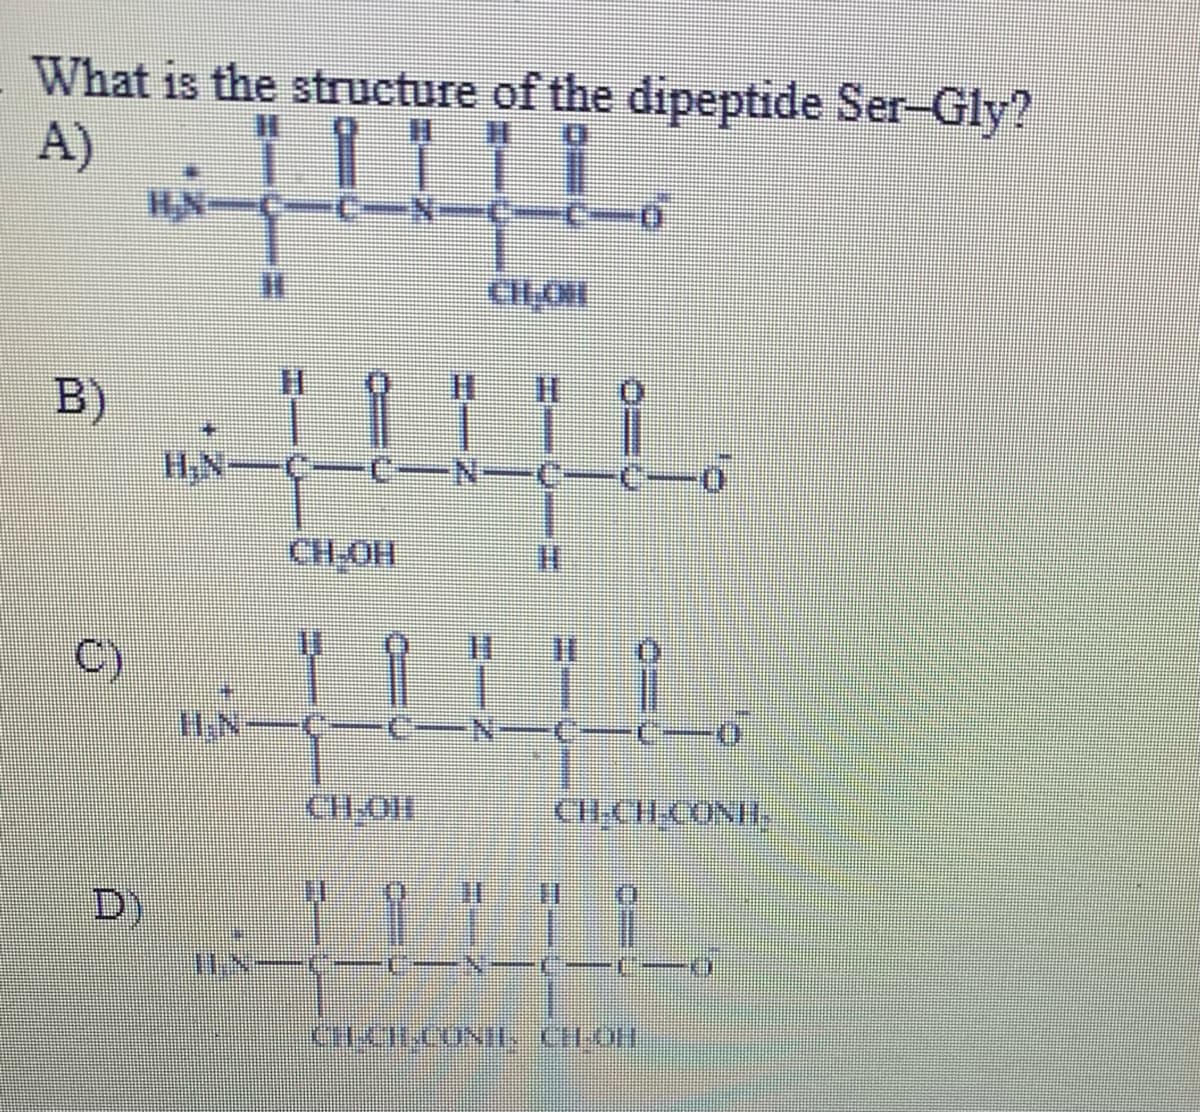 What is the structure of the dipeptide Ser-Gly?
A)
HN
B)
H,N-Ç-
-N-C
CH-OH
C)
I.N
N-C
CH-OH
CIICH CONH,
D)
